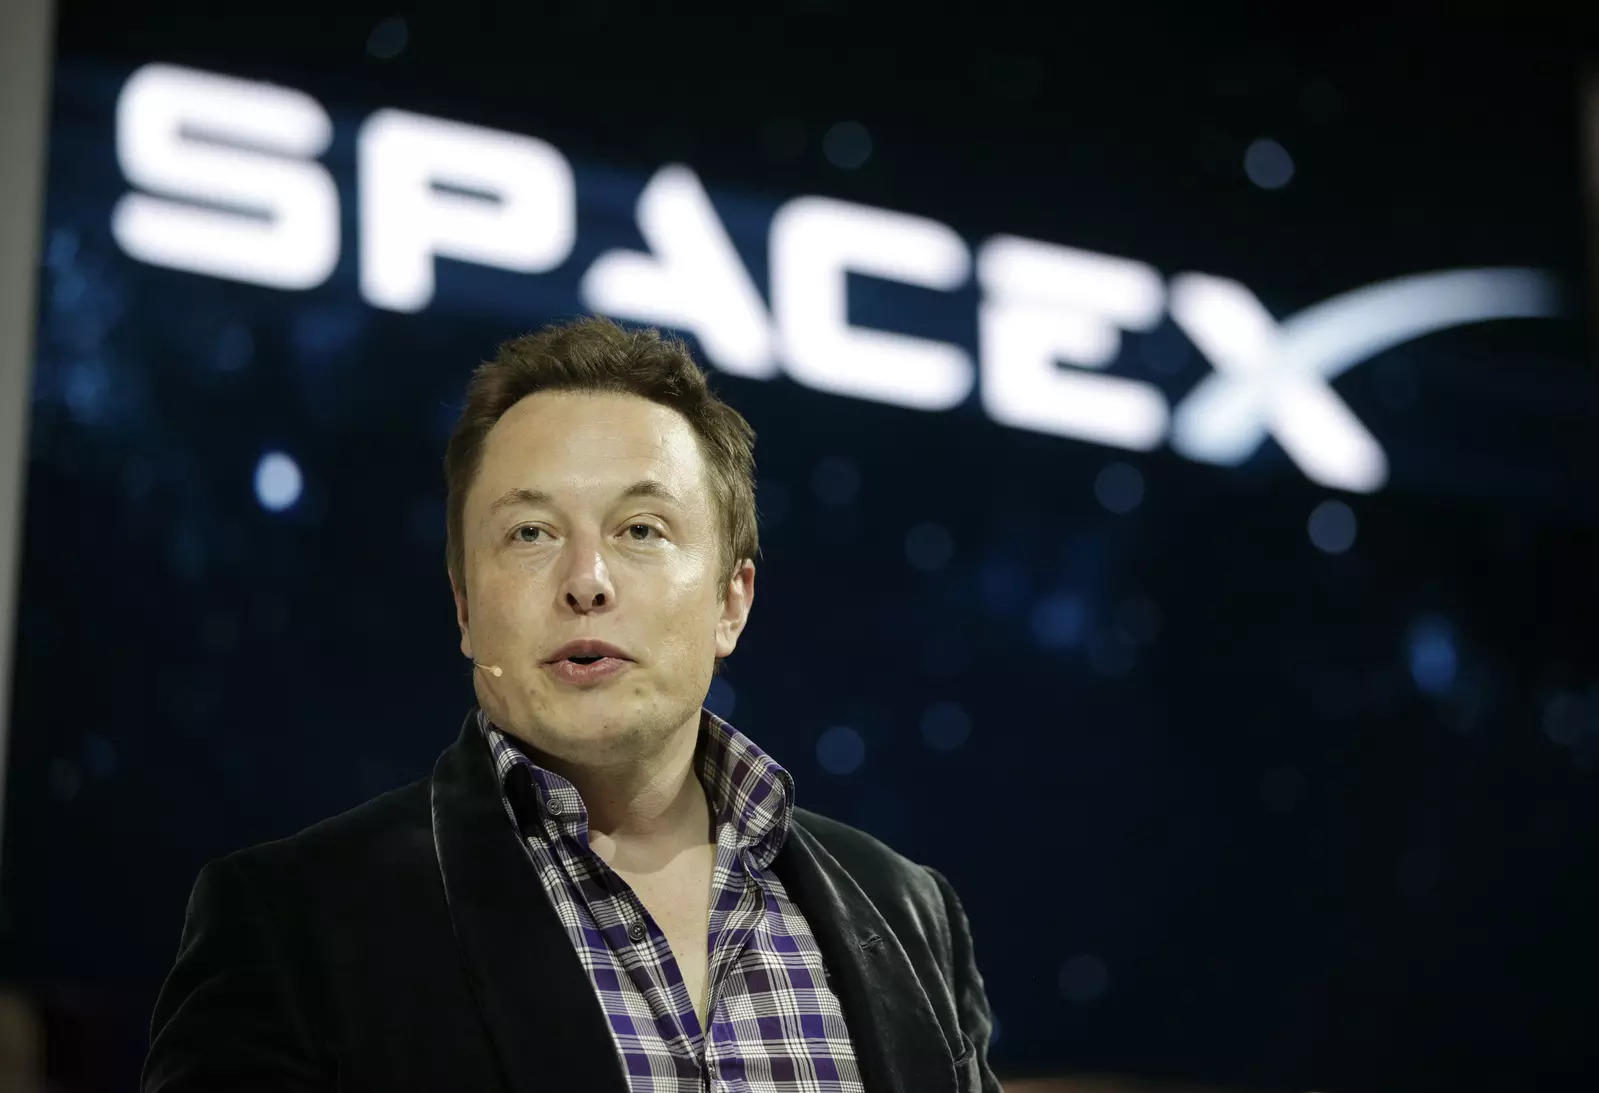 Elon Musk says SpaceX can not pay for Ukraine’s critical satellite services, urges Pentagon to step in